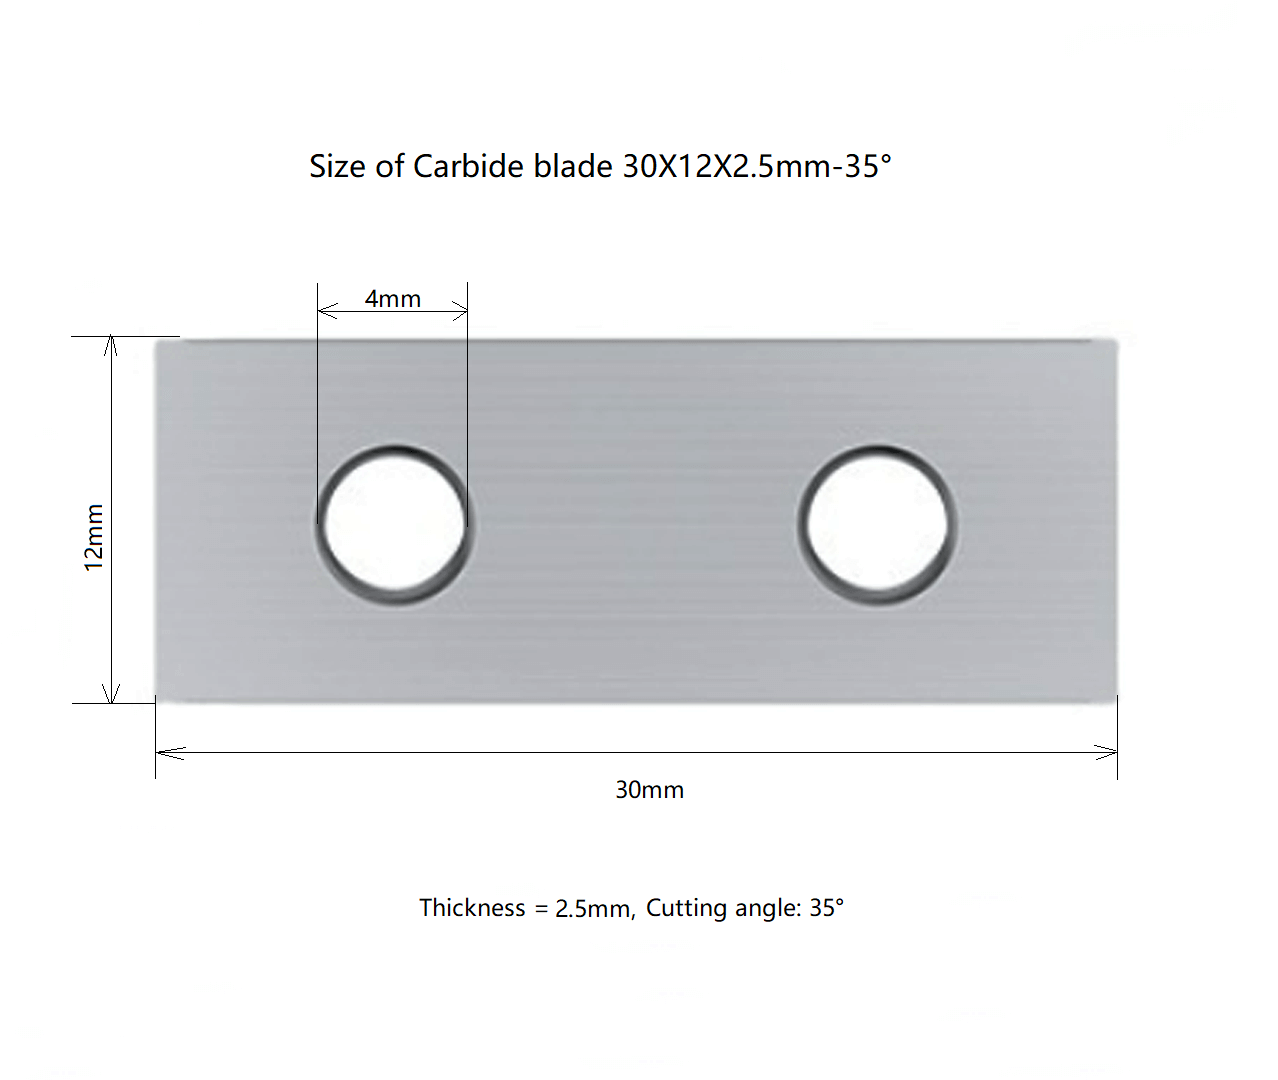 Size of Carbide blade 30X12X2.5mm-35°